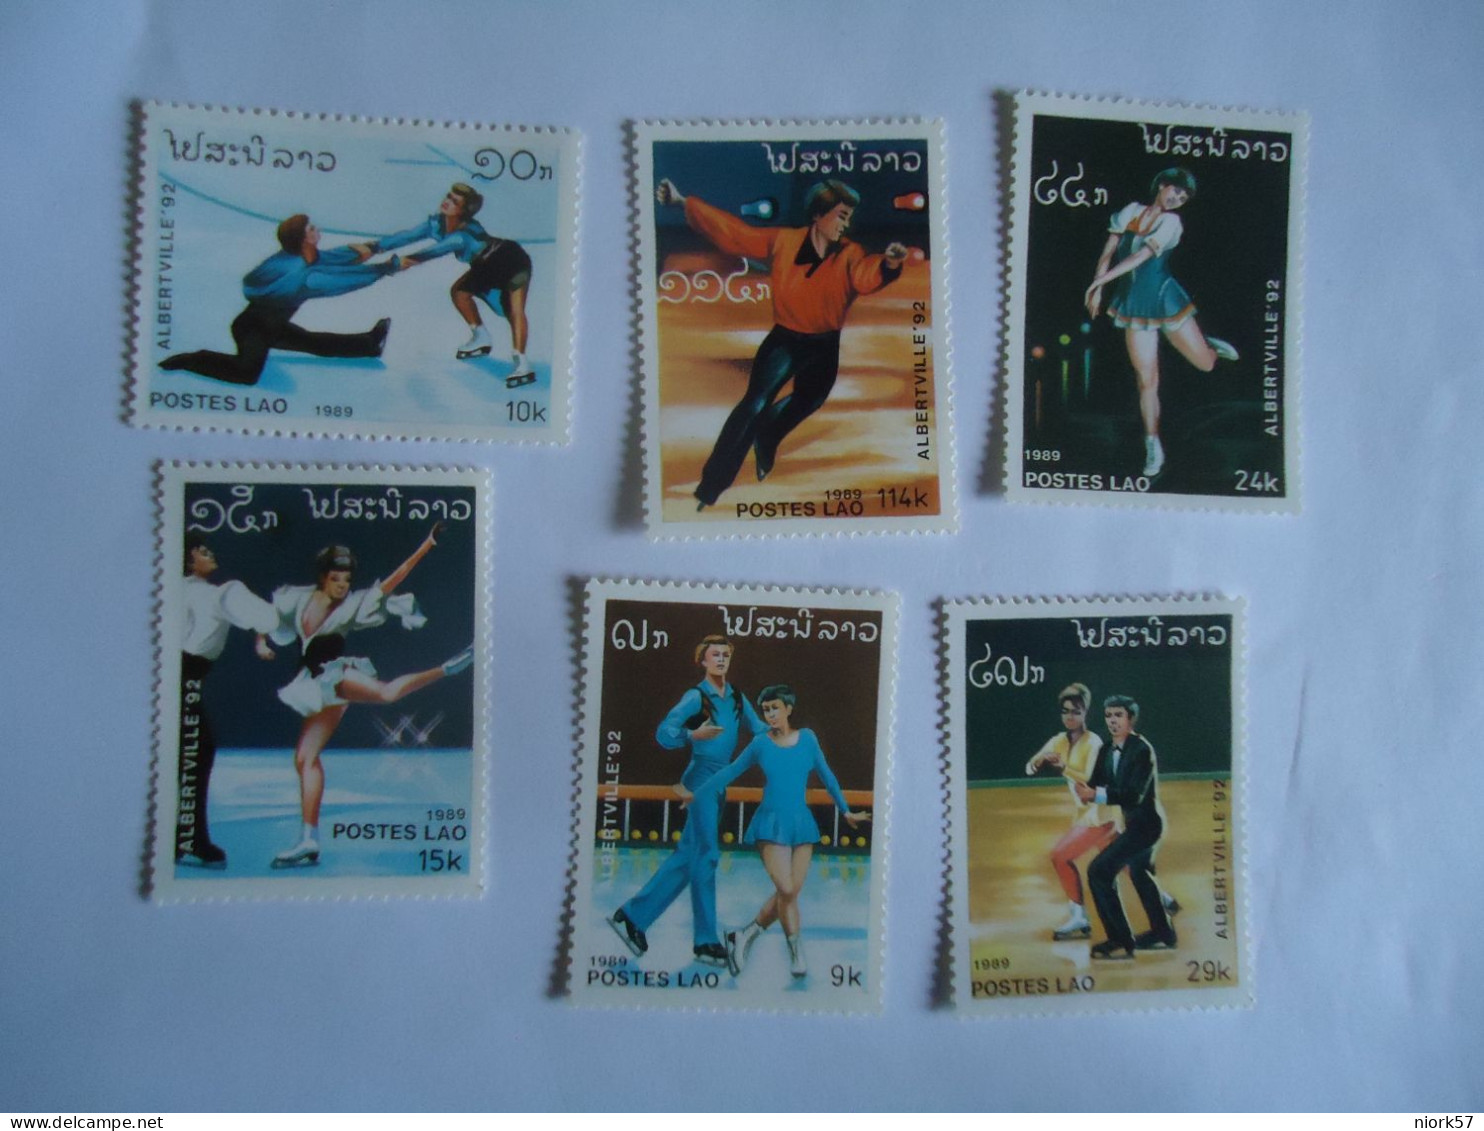 LAOS  MNH  STAMPS   SET  6  OLYMPIC  GAMES   LOS ANGELES 1984 - Ete 1984: Los Angeles